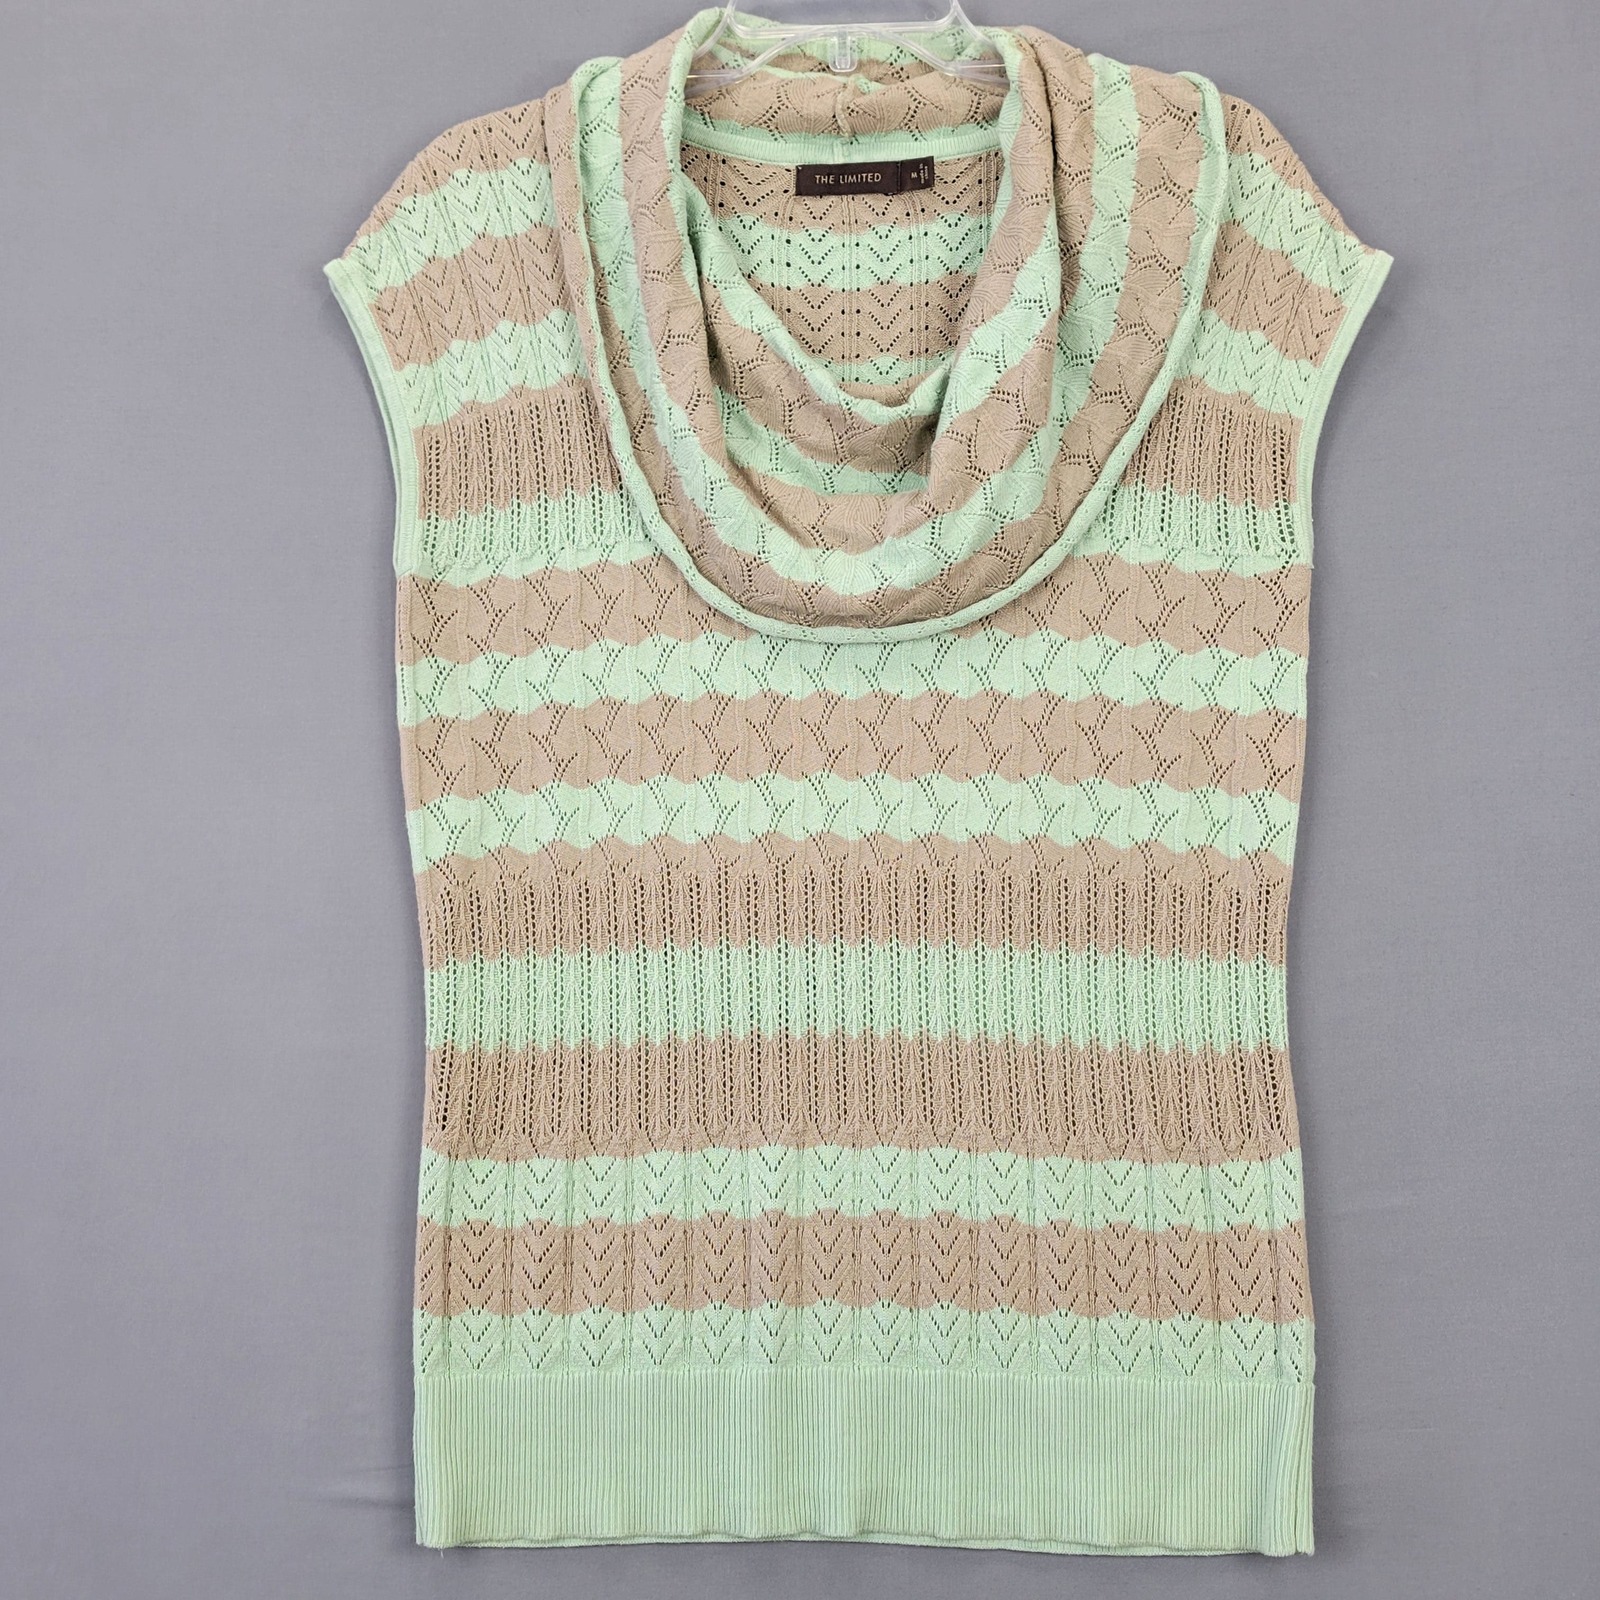 Primary image for The Limited Women Sweater Size M Green Preppy Stripe Loose Knit Sleeveless Top